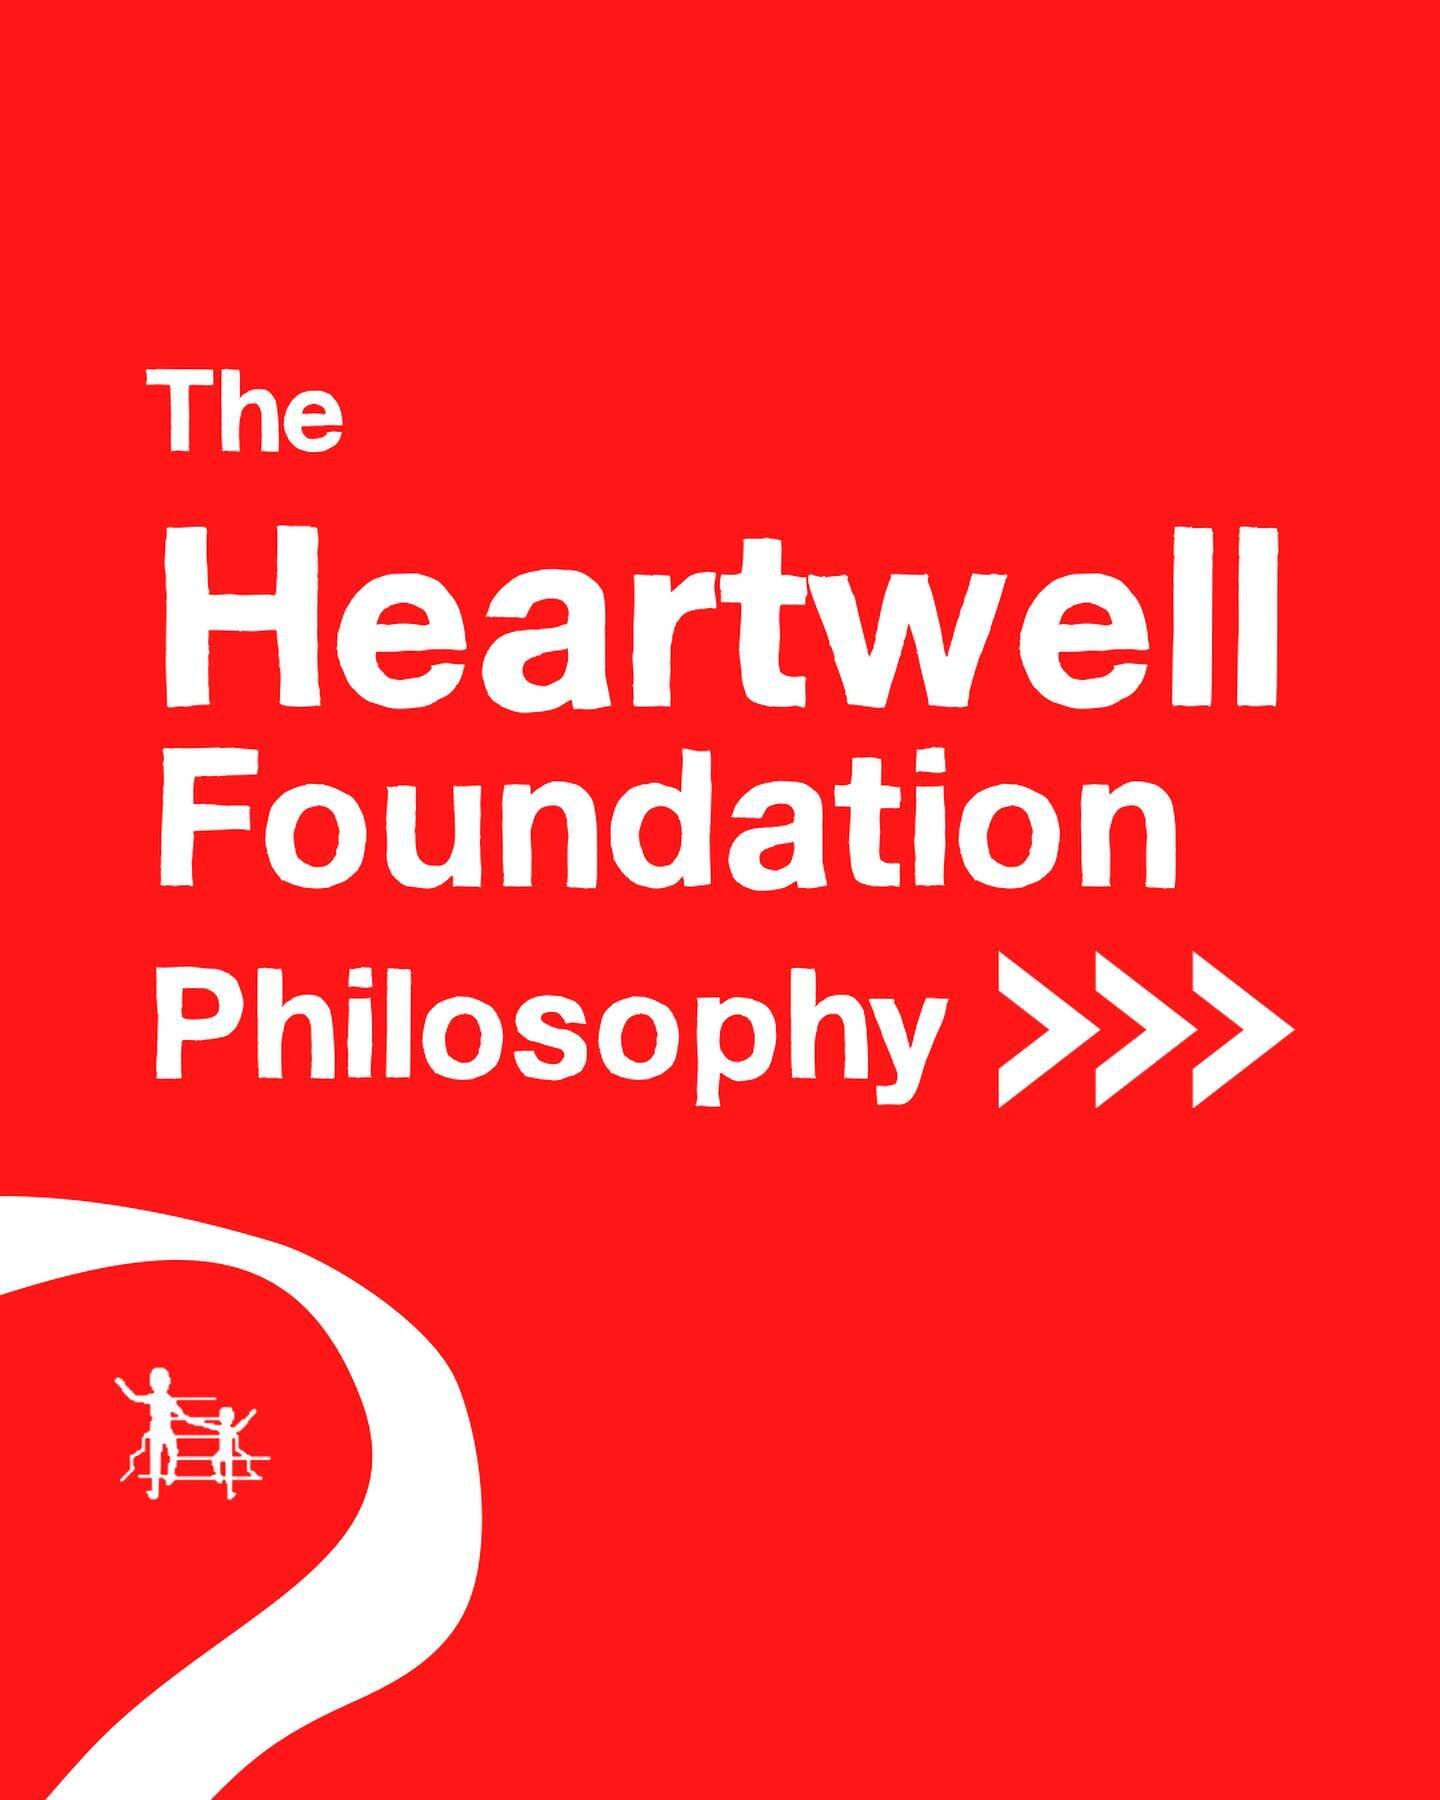 The Heartwell Foundation believes passionately in the power of exercise &amp; physical education for everybody.

❣️

Image description 1:
In white text over red background: &ldquo;The Heartwell Foundation Philosophy.&rdquo;

Image description 2:
In w